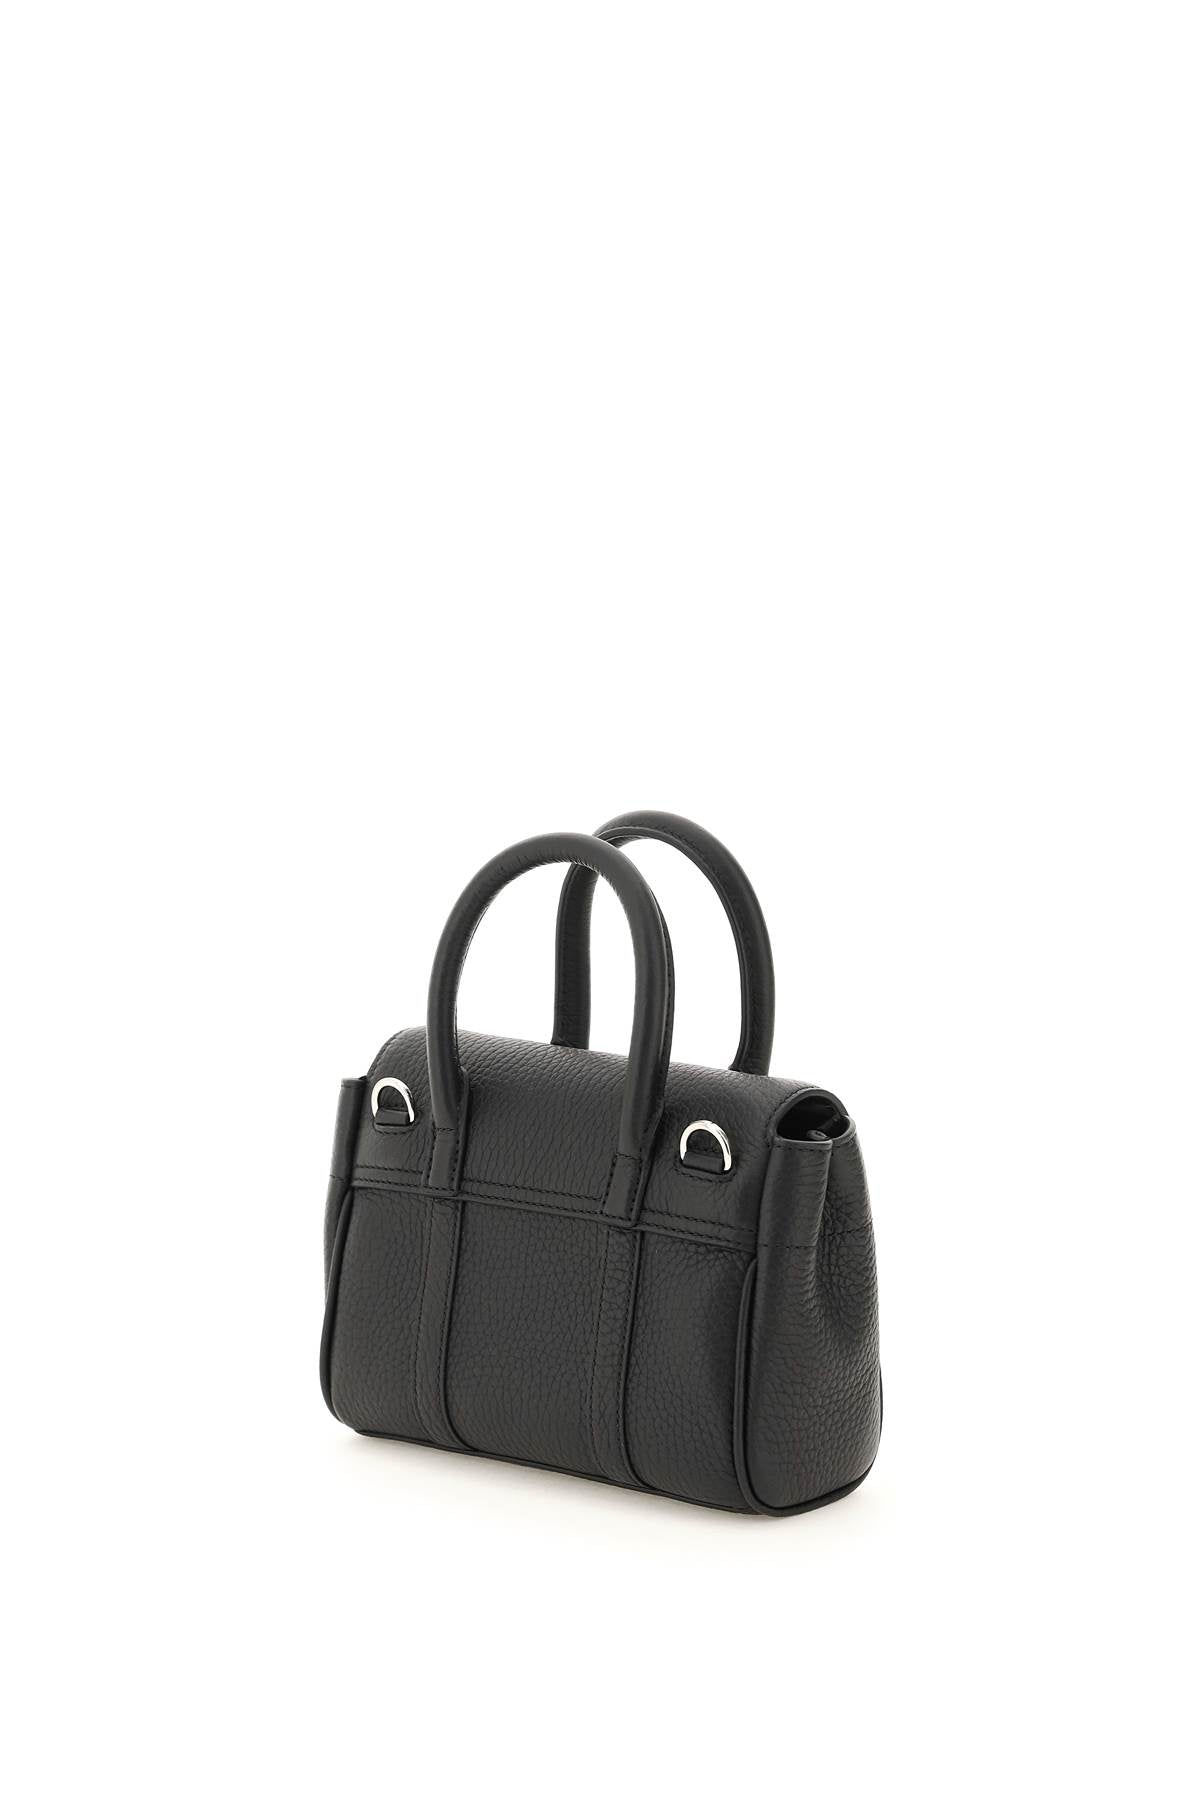 Shop Mulberry Bayswater Mini Handbag For Women In Grained Leather In Black